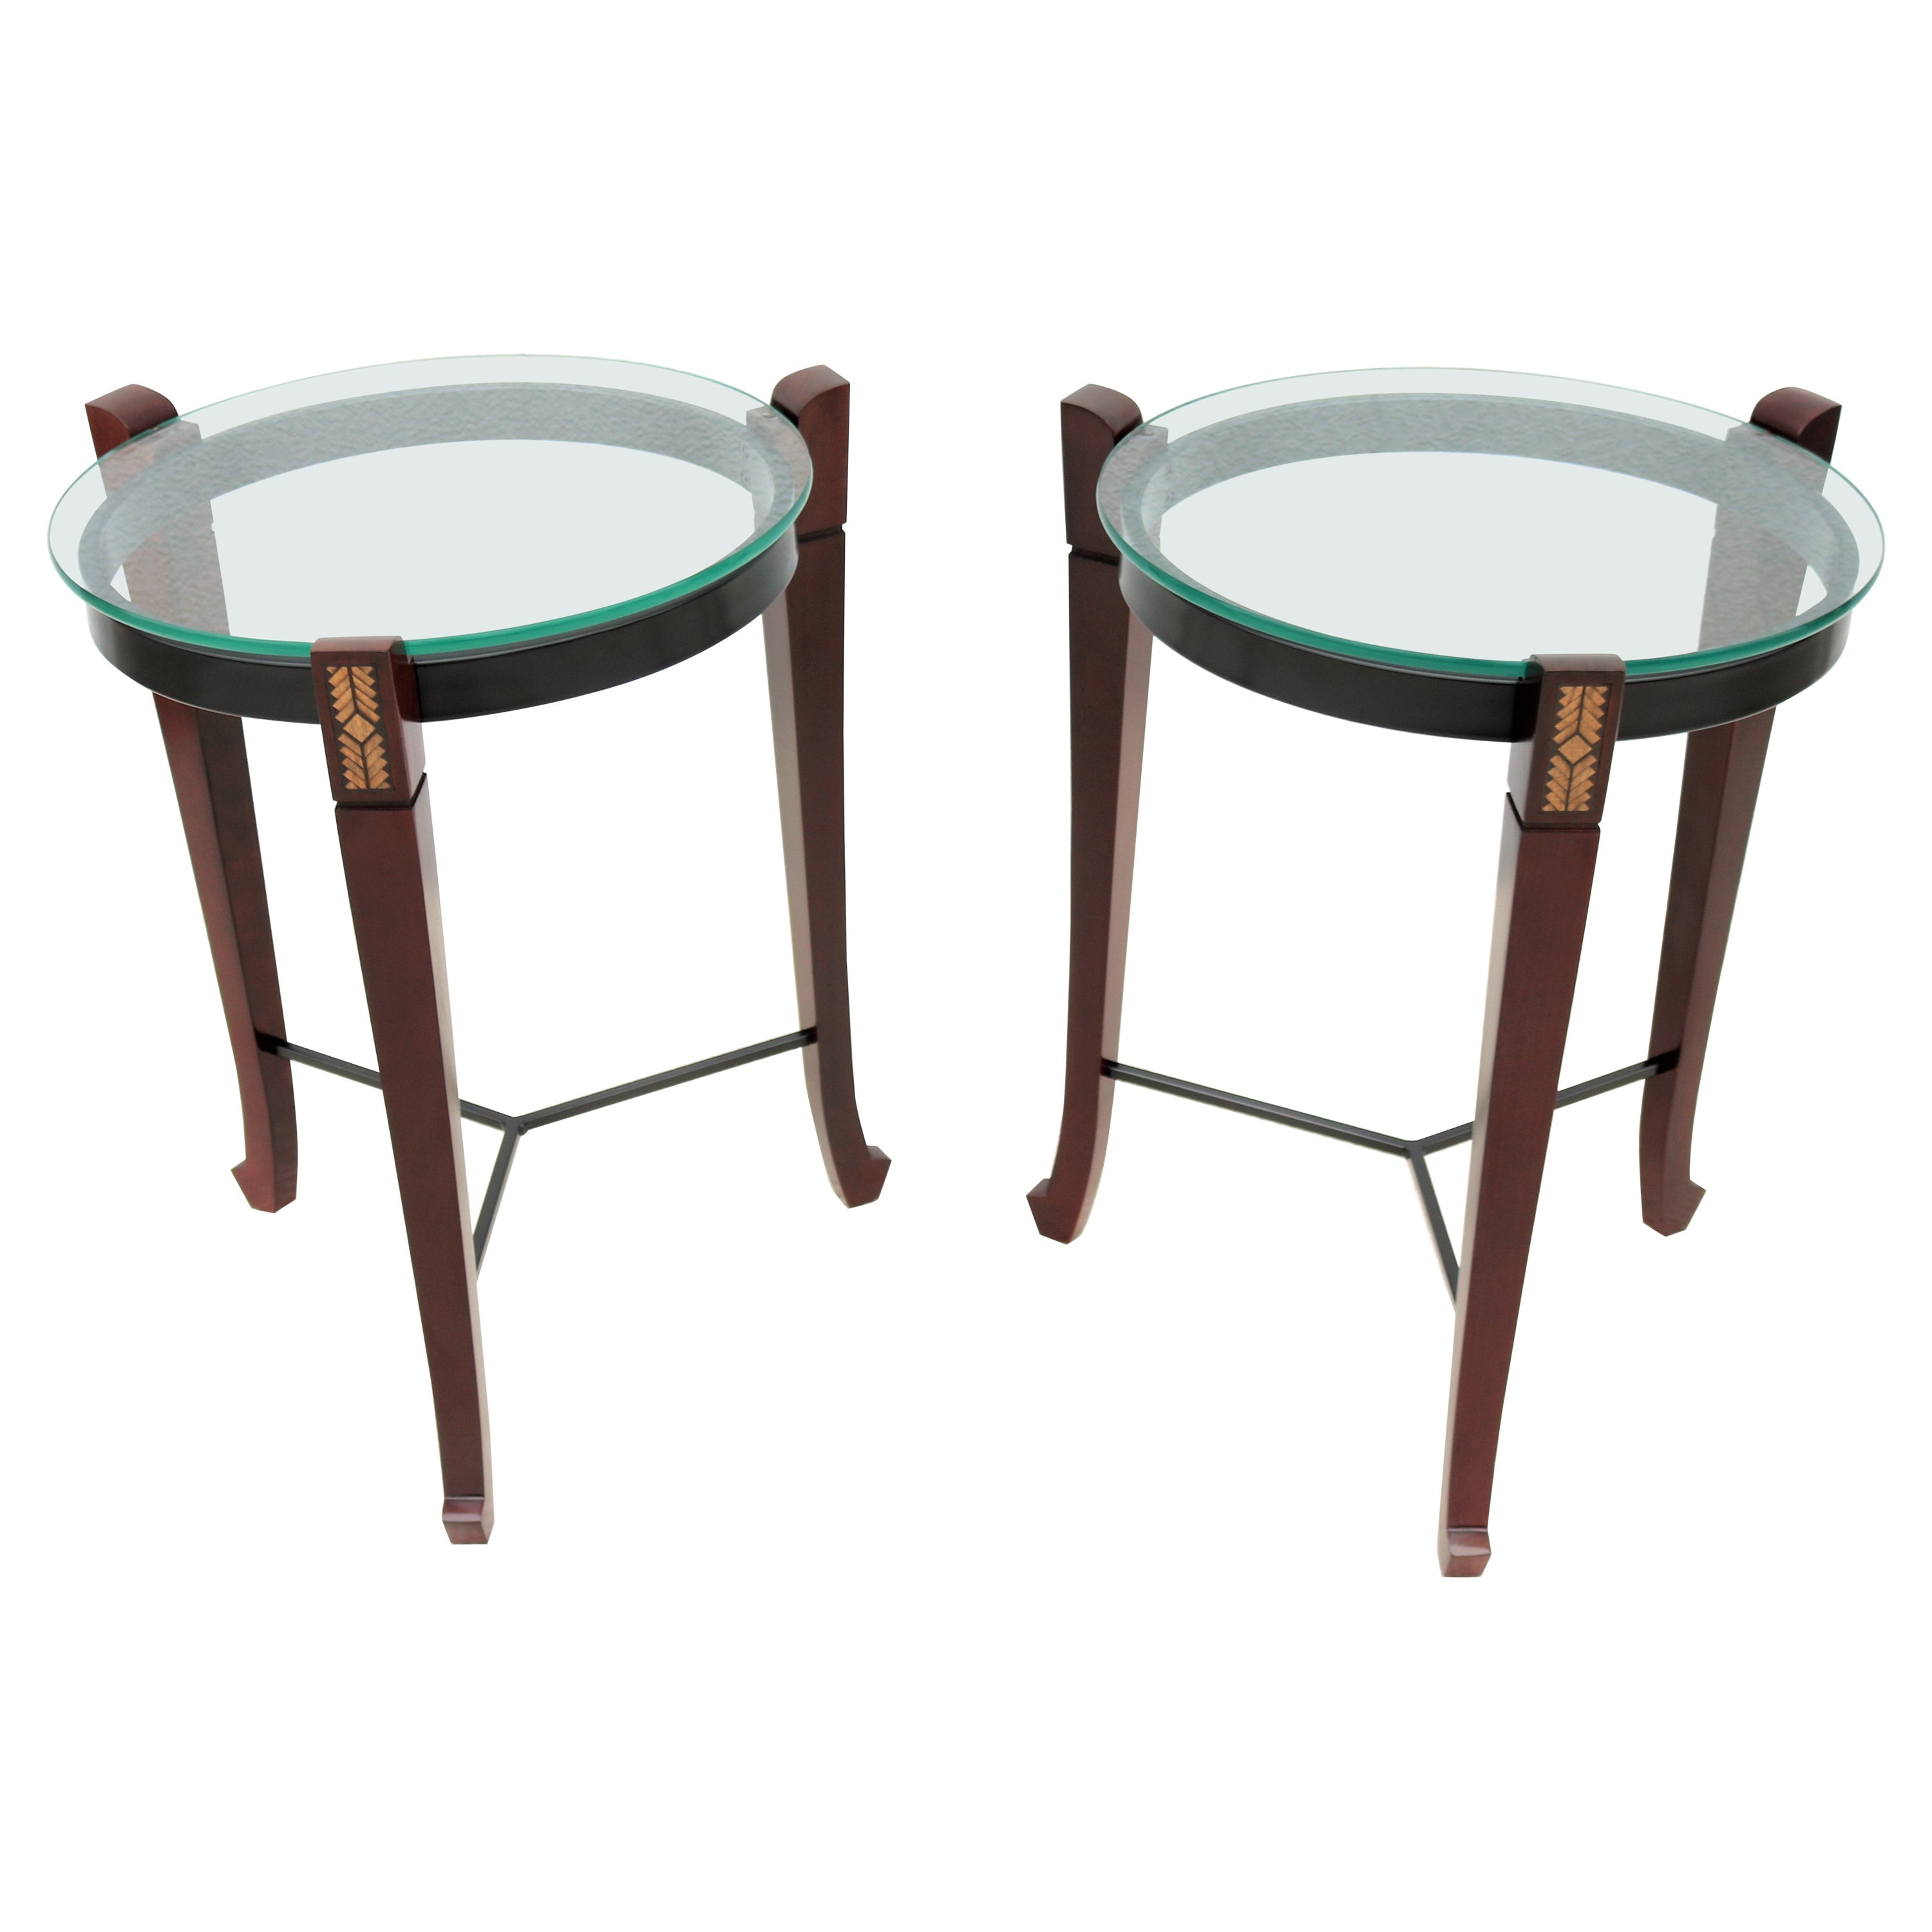 Traditional Cherry Wood and Transparent Glass Round Side Tables - a Pair For Sale